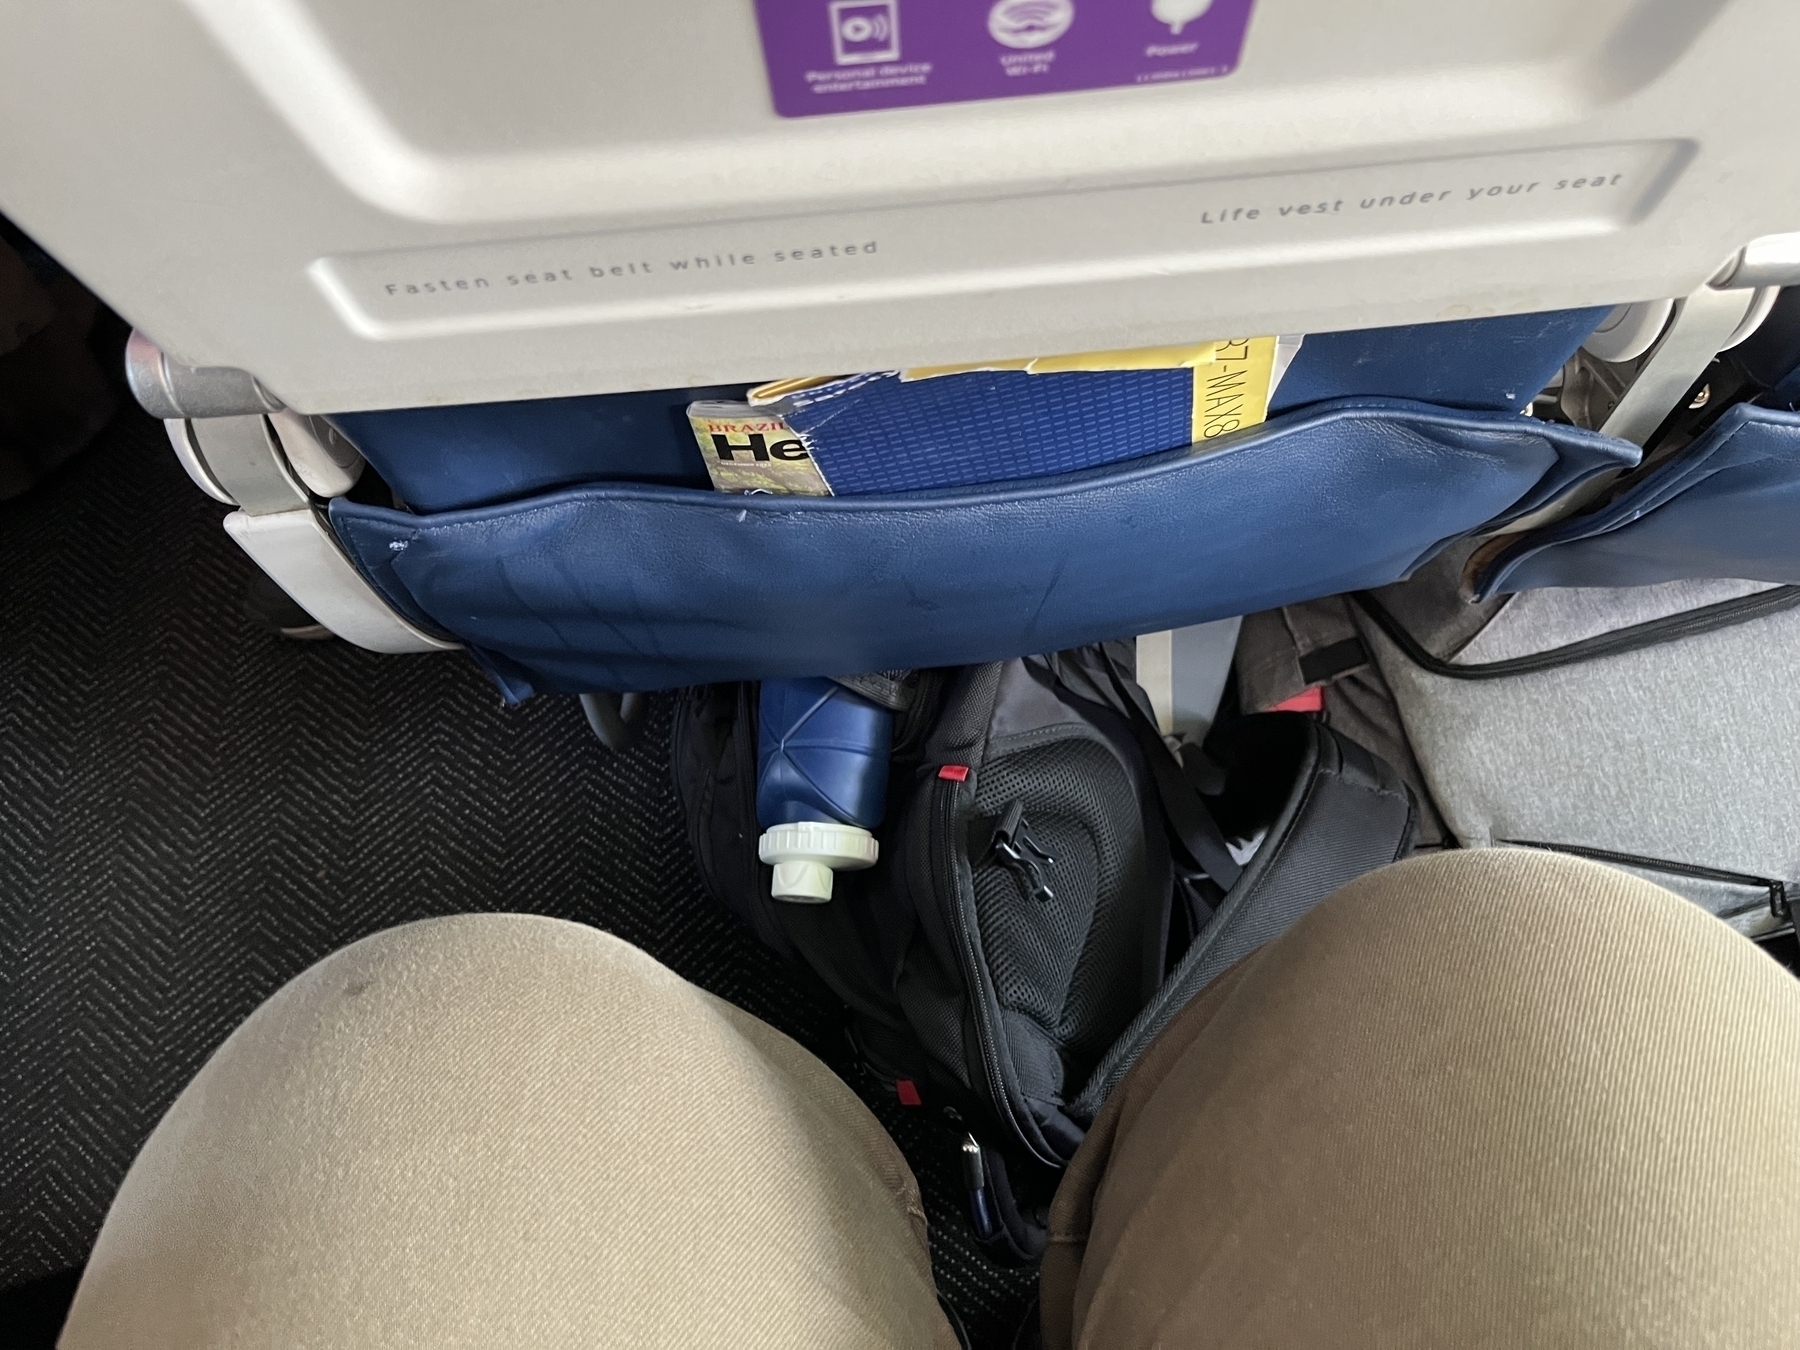 Pair of legs with 6” between knees and seat with a backpack visible on the ground and tray table up. 